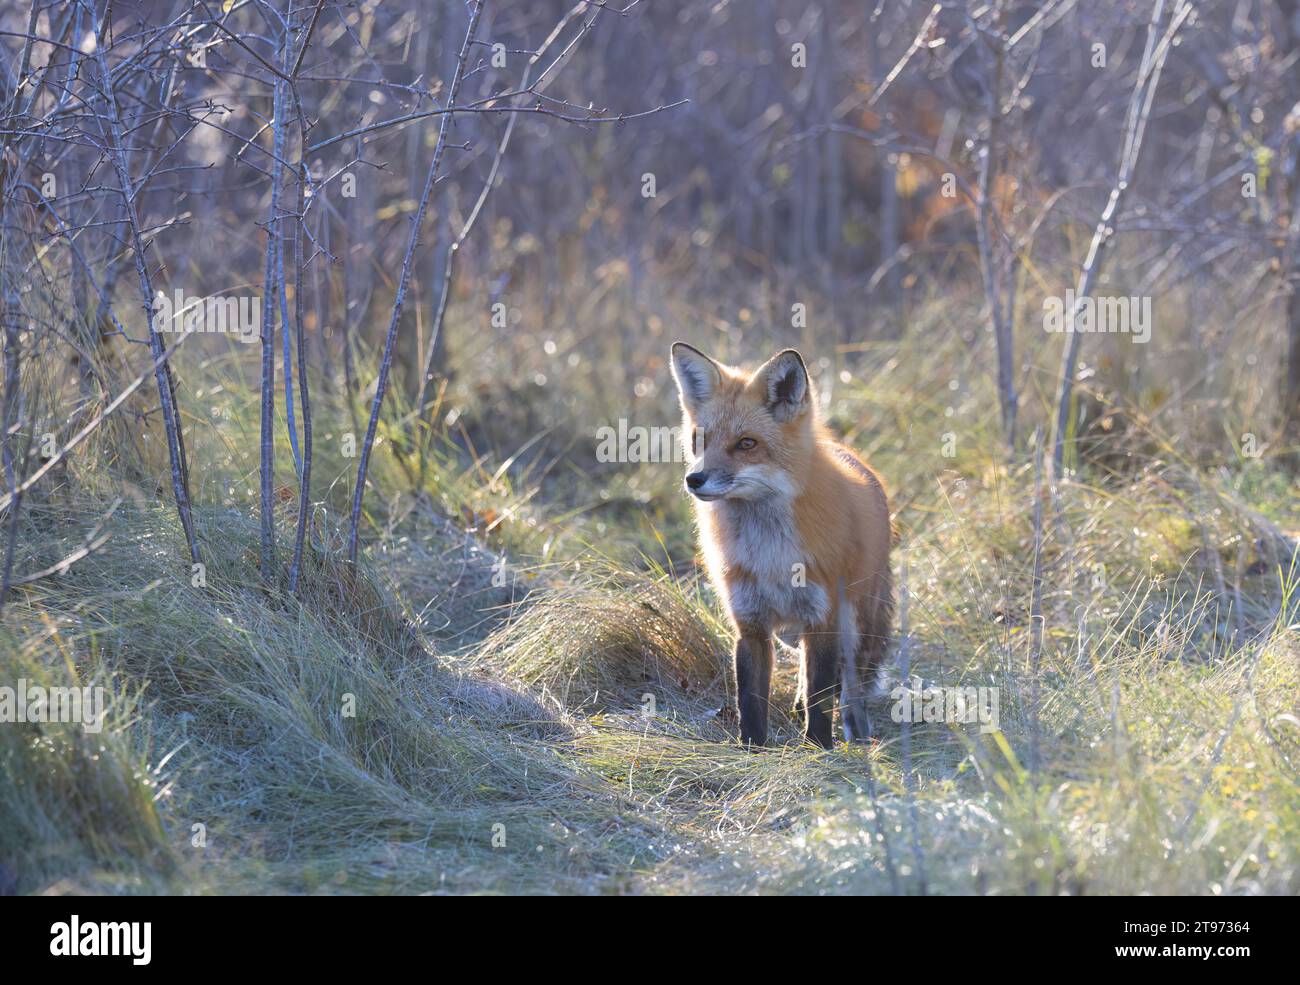 A young red fox walking through a grassy meadow in autumn. Stock Photo